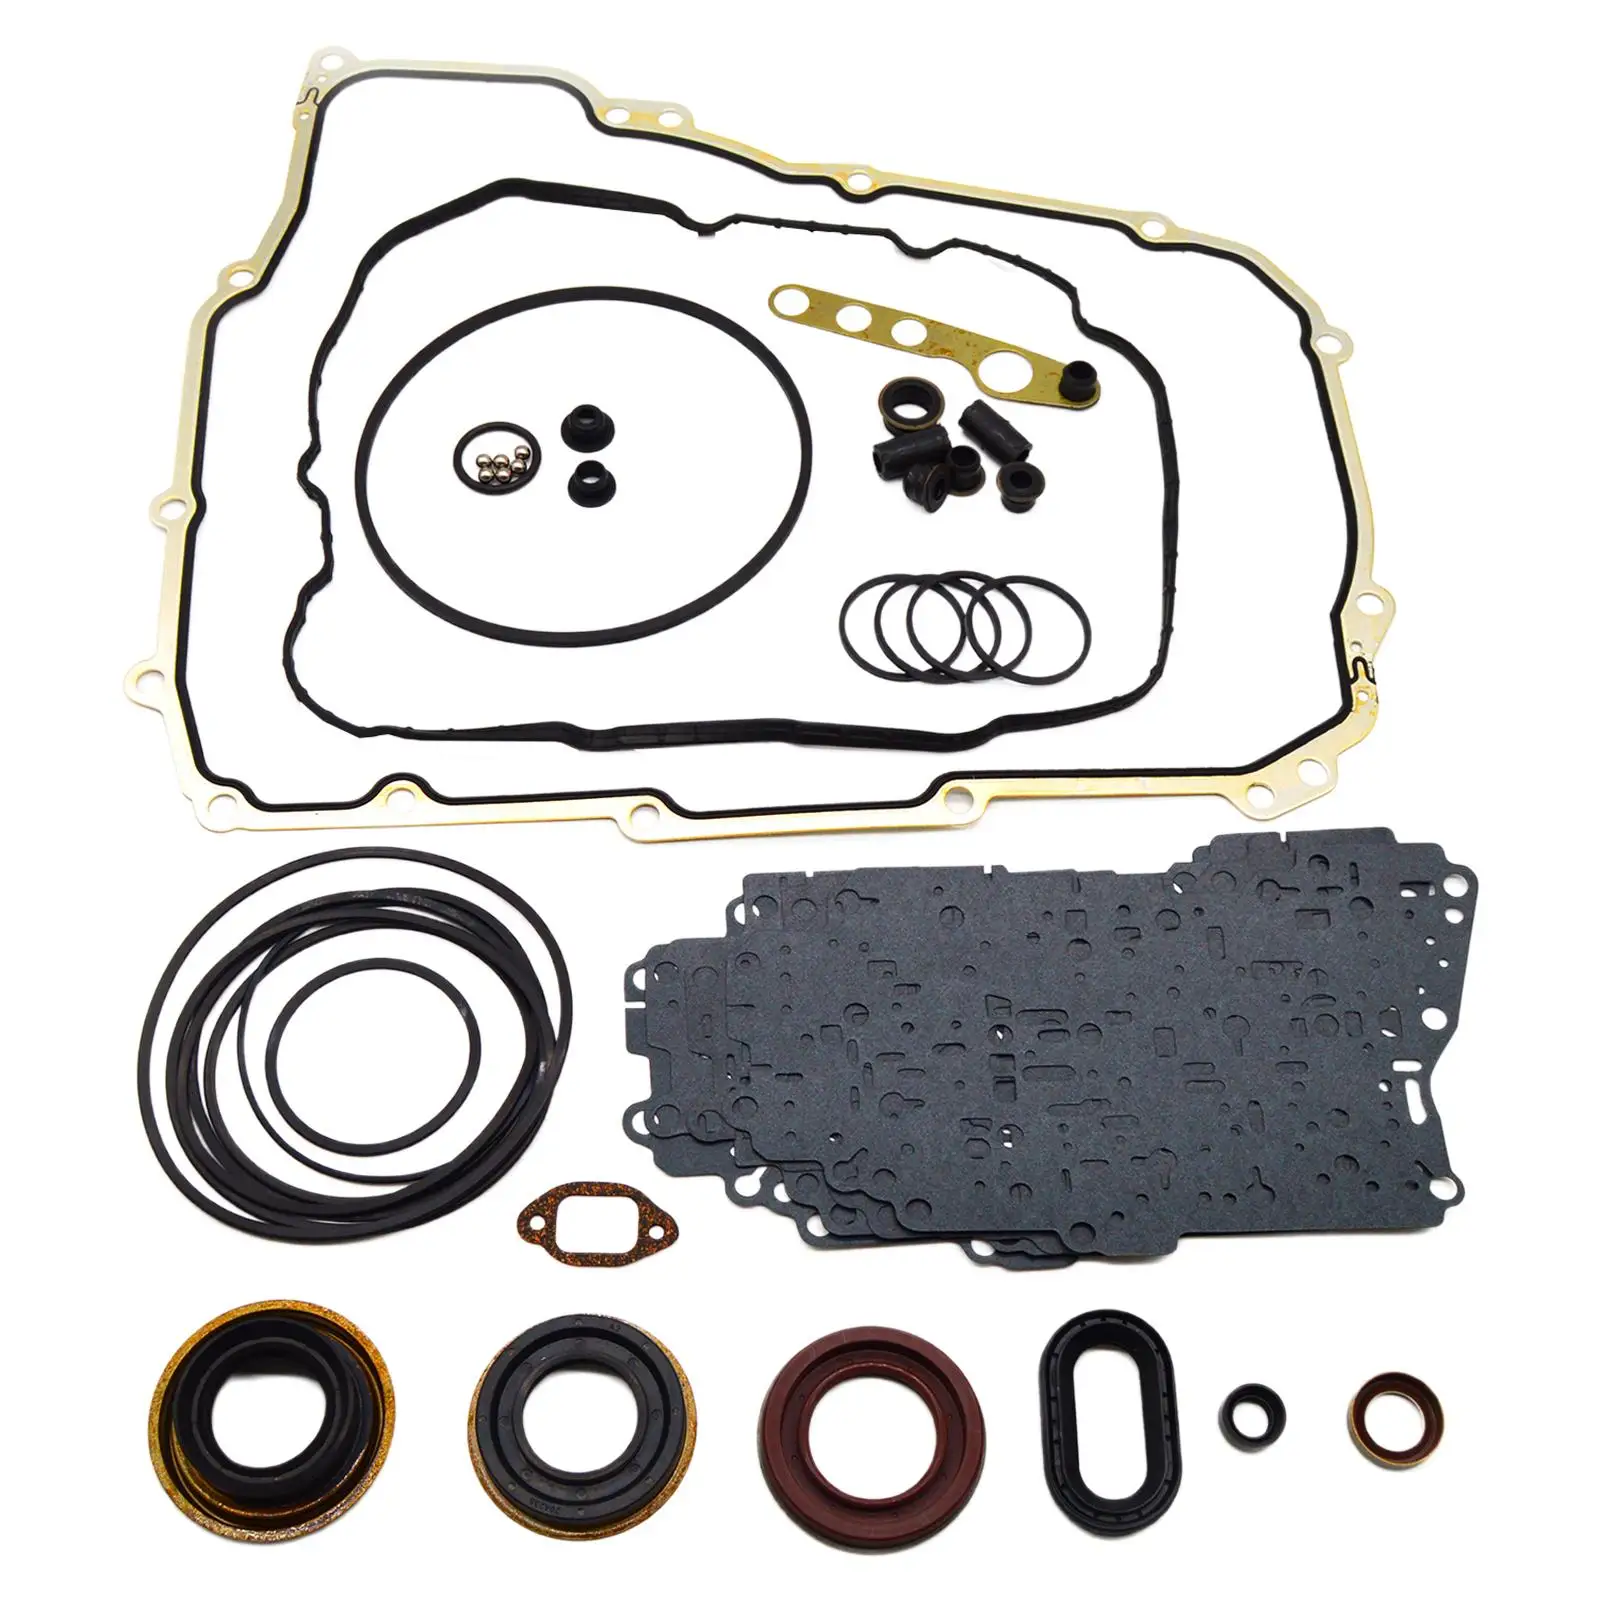 

Transmission Overhaul Kit 6T30E with Seals Gasket T21002A Replacement 6 Speed Front Drive Repair Parts GM for Hideo